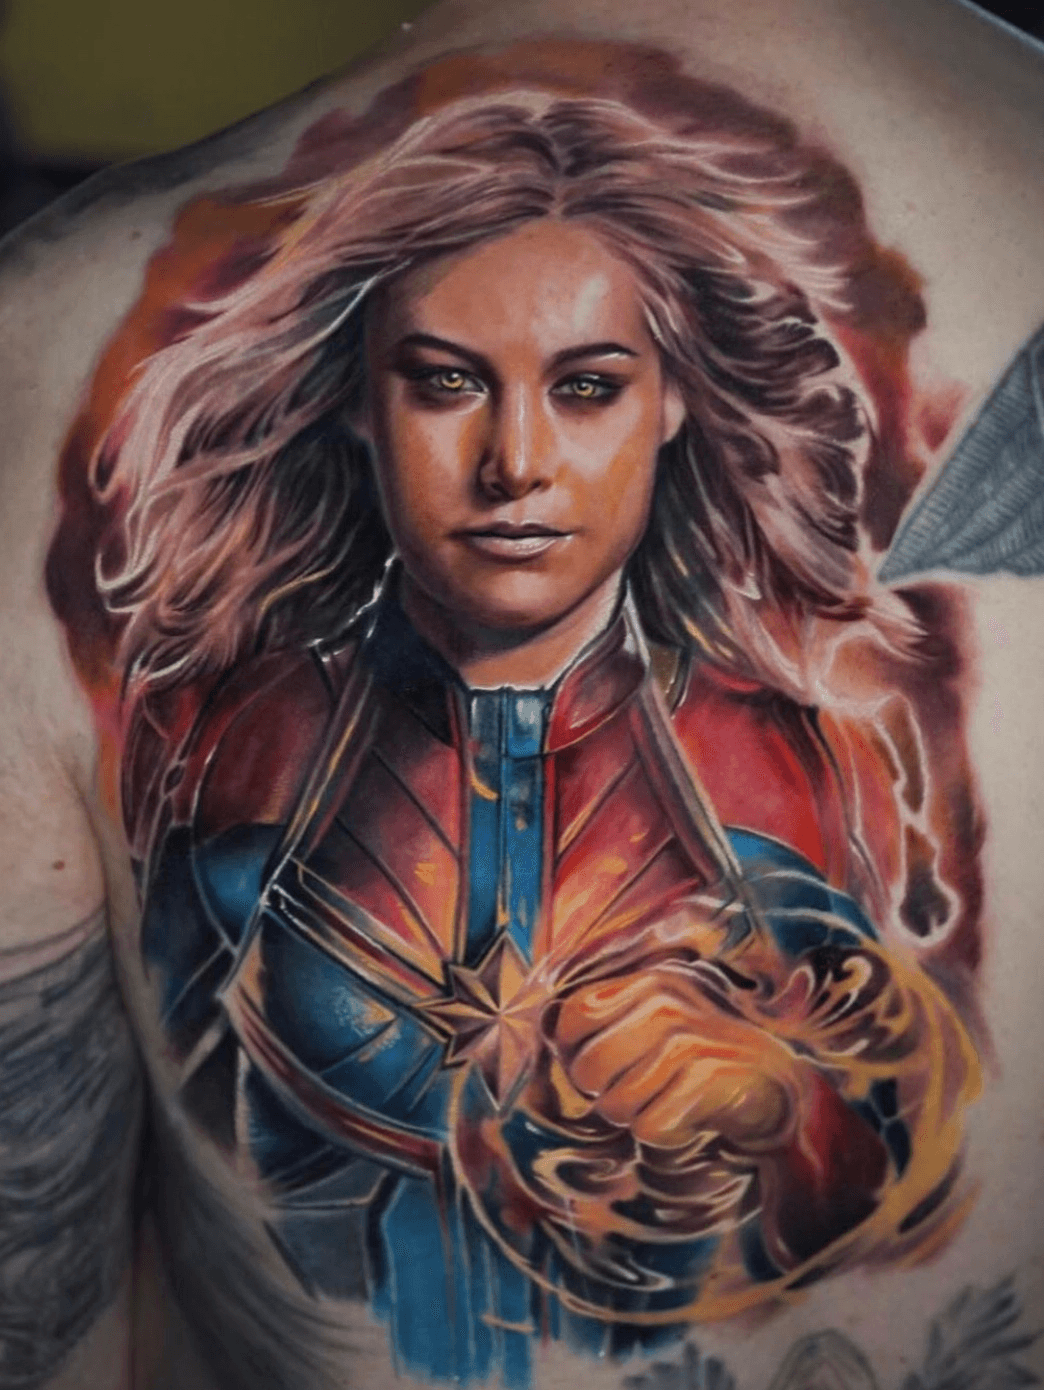 sarah  on Twitter my captain marvel tattoo watching captain marvel  made me feel like i could do anything having this makes me want to do  better to be better i want